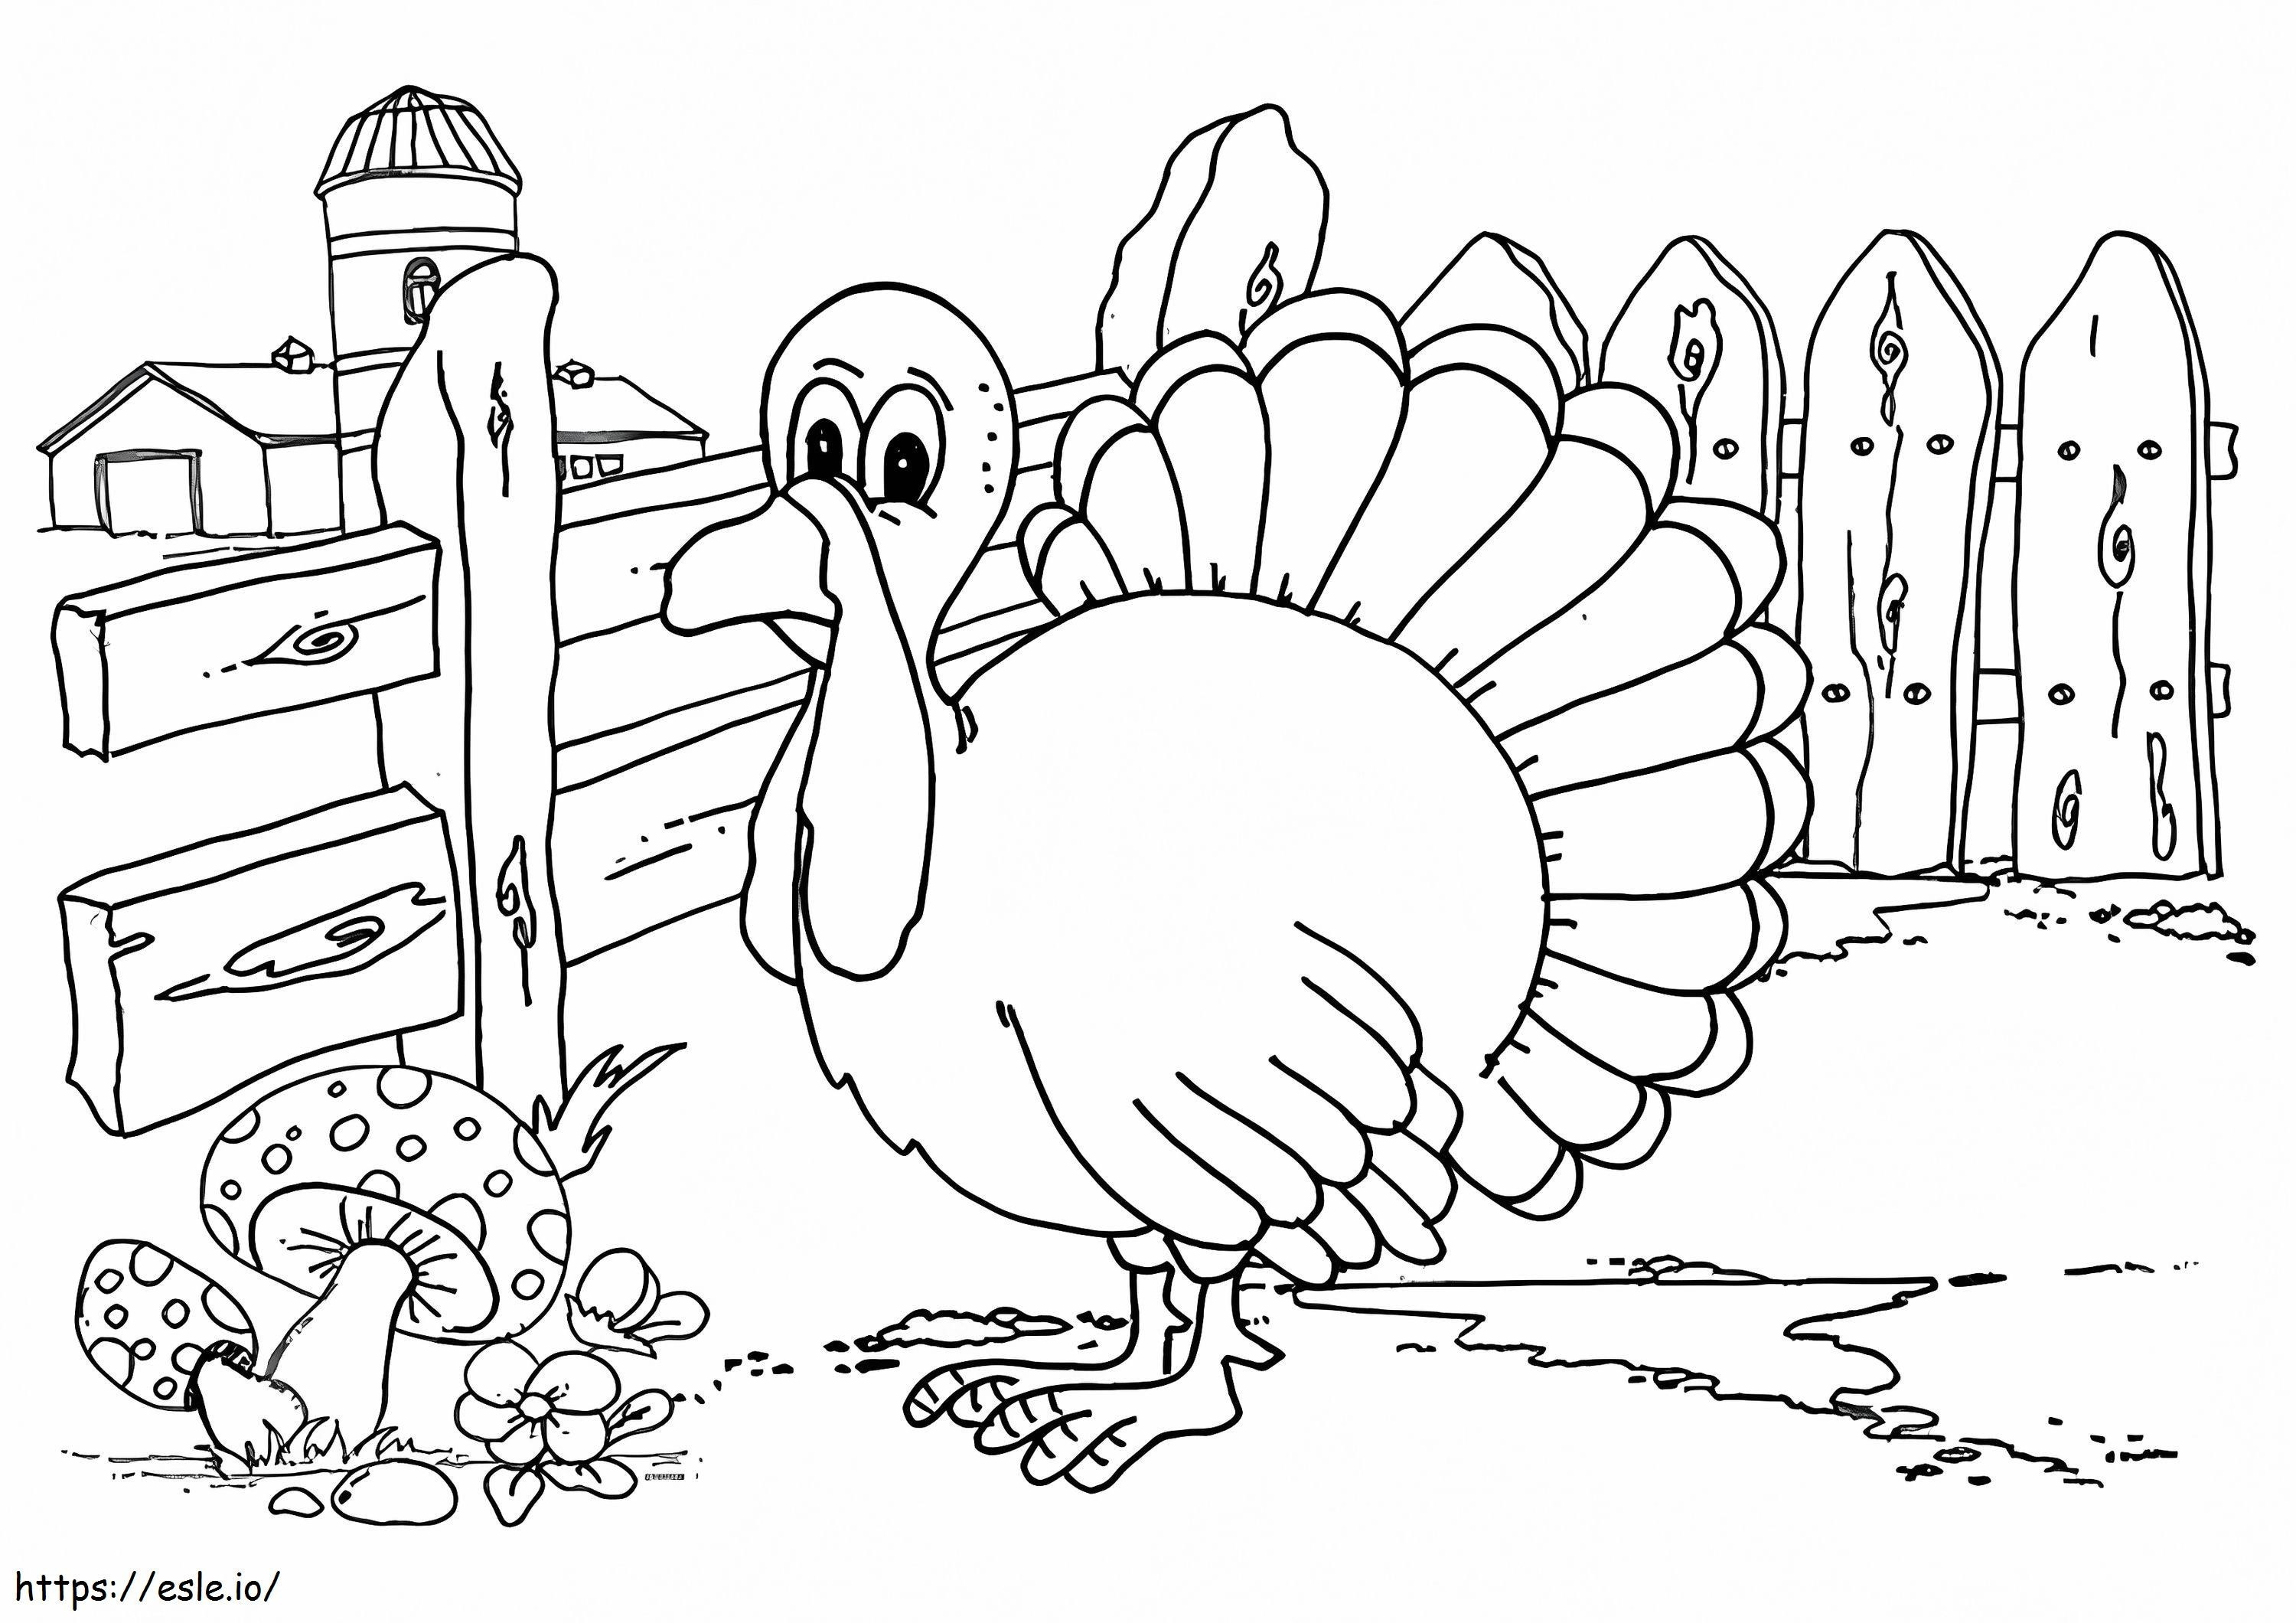 Turkey On The Farm coloring page